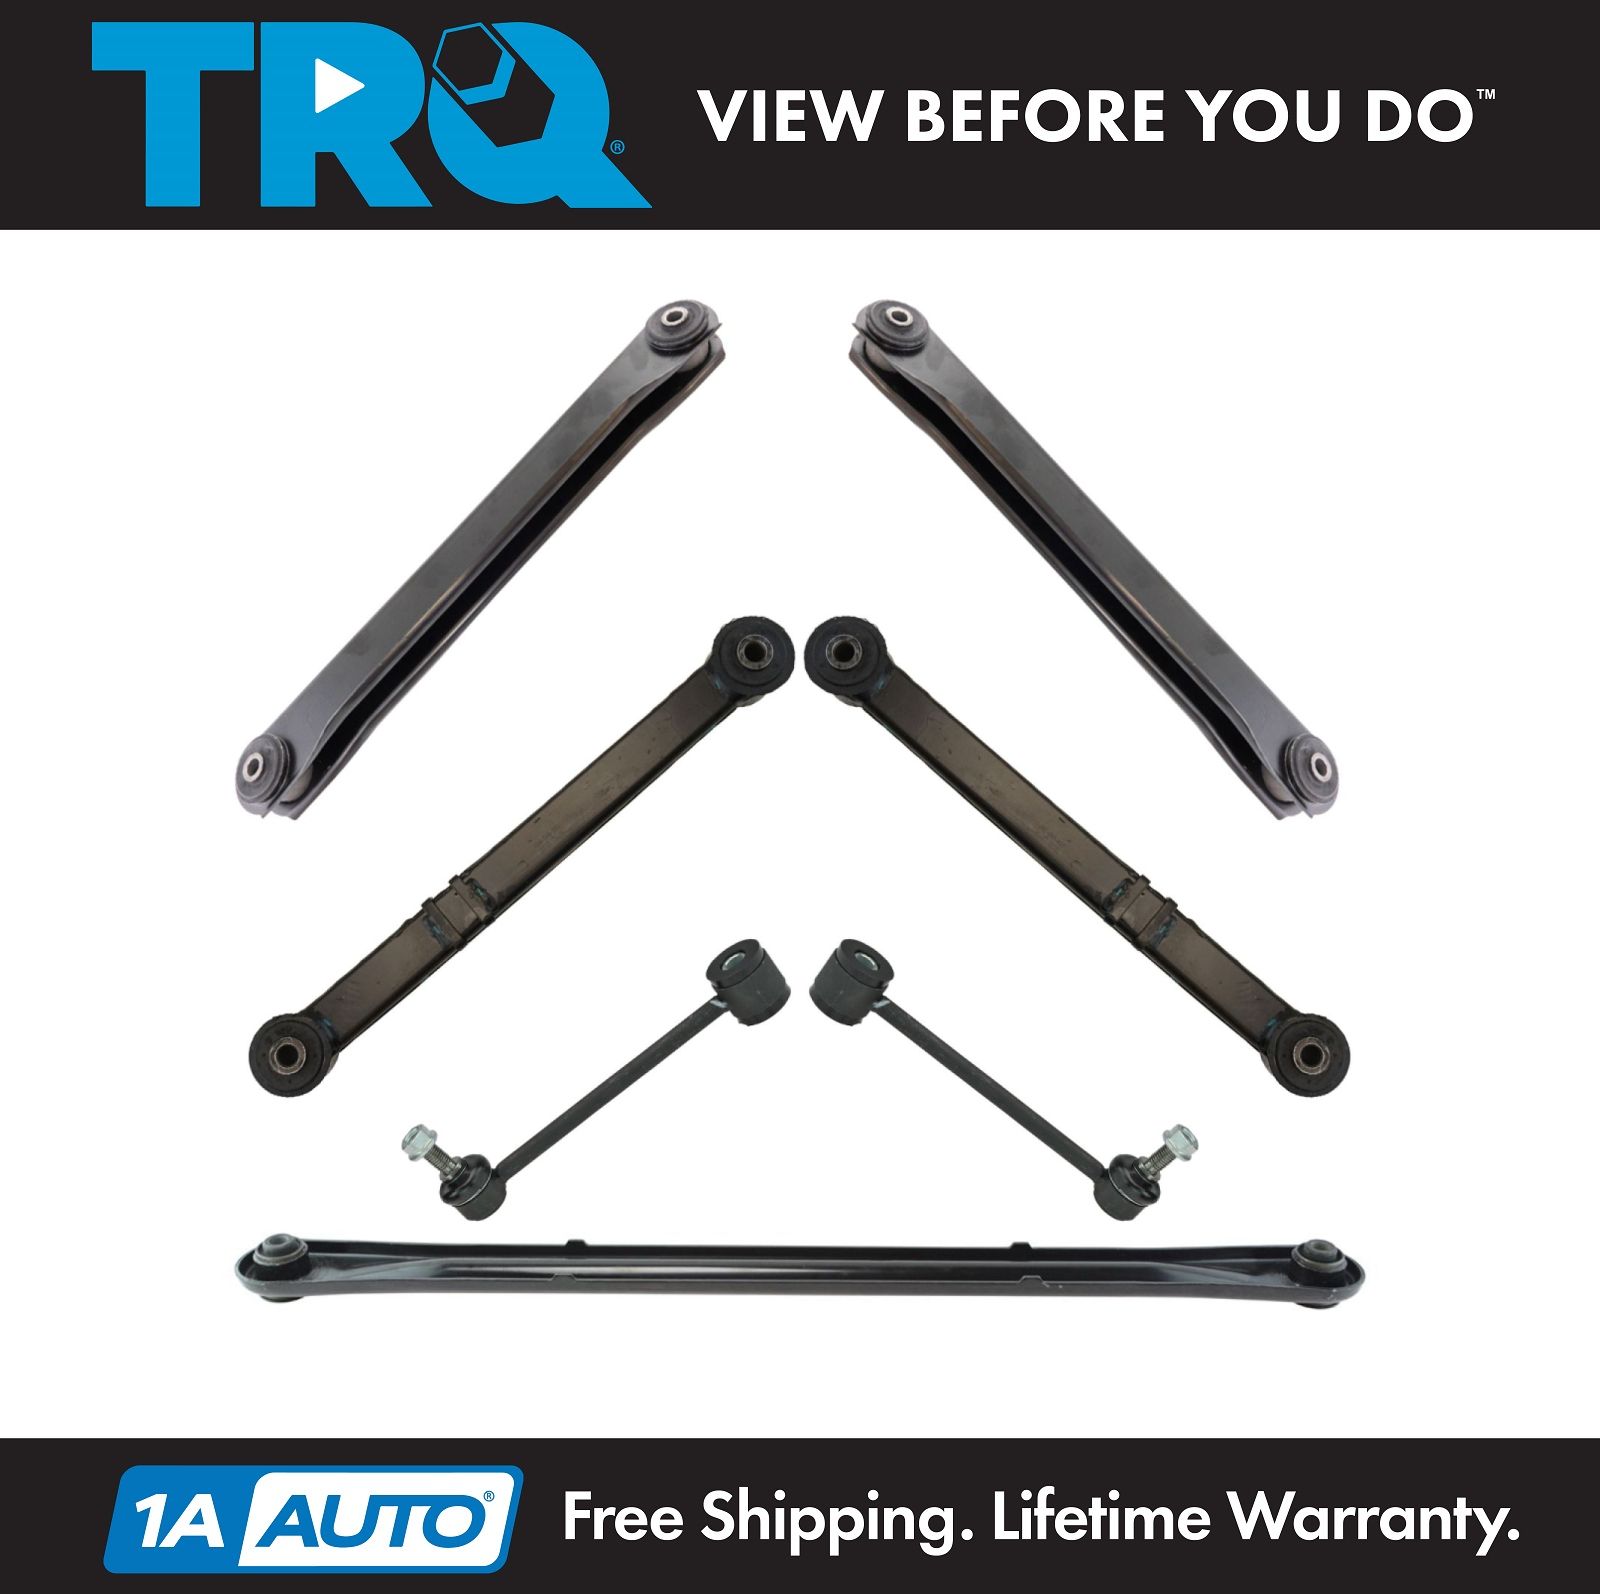 17 New Pc Suspension Kit for Escalade Avalanche 1500 Tahoe Yukon Control Arms